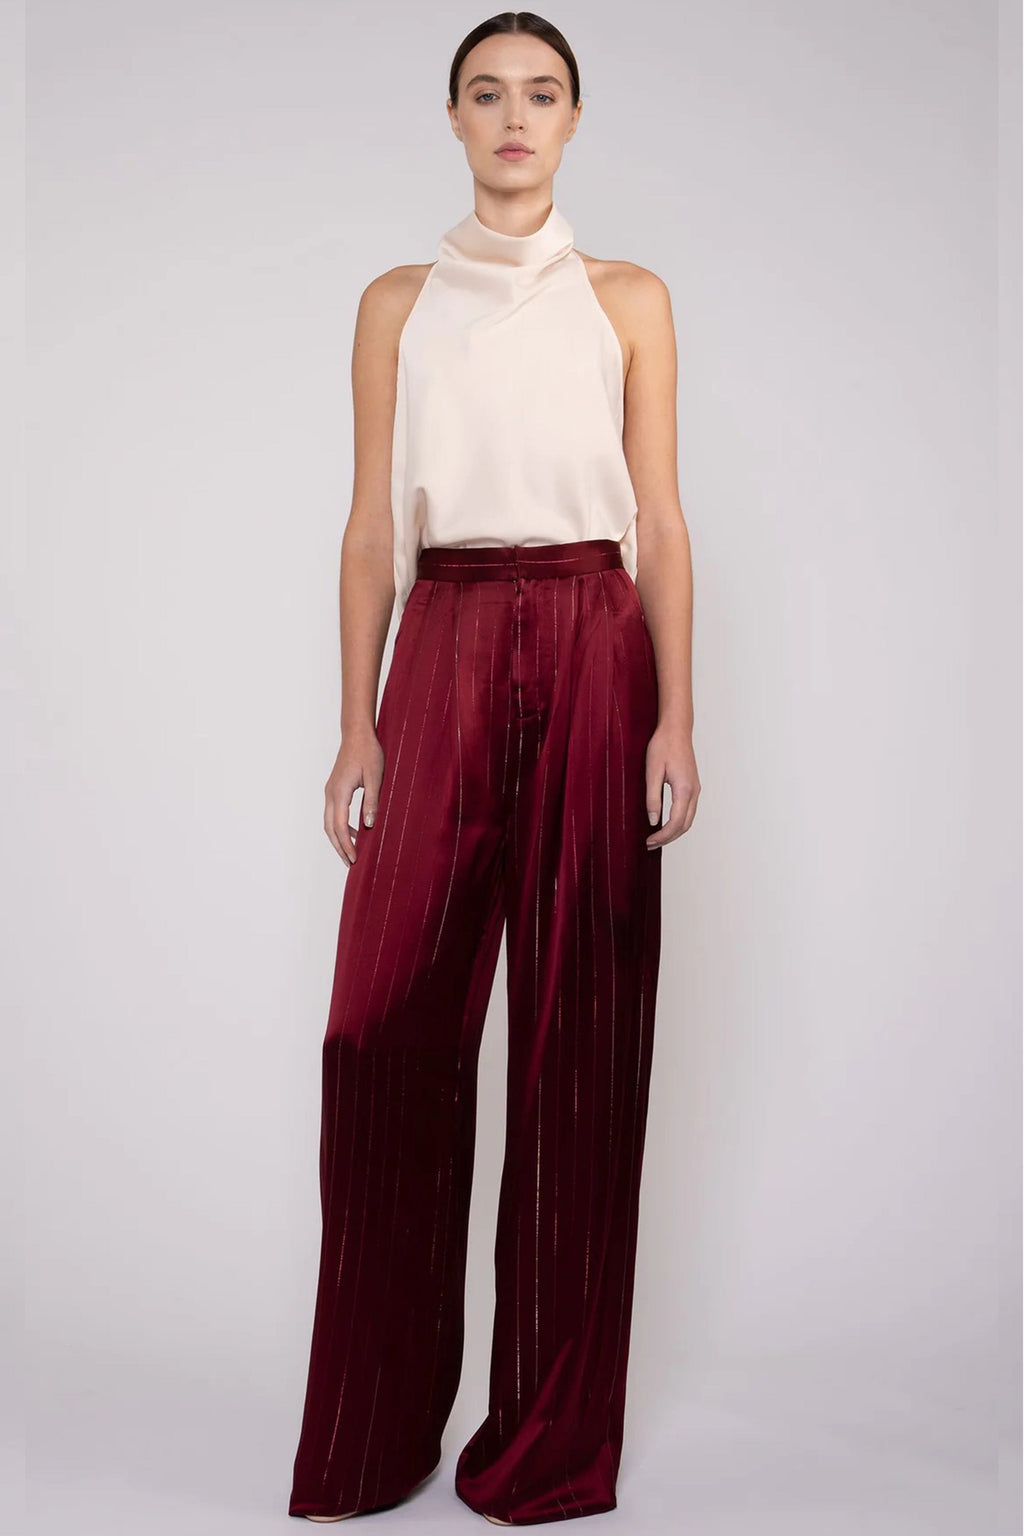 NONCHALANT | Hester Pant - Red/Silver